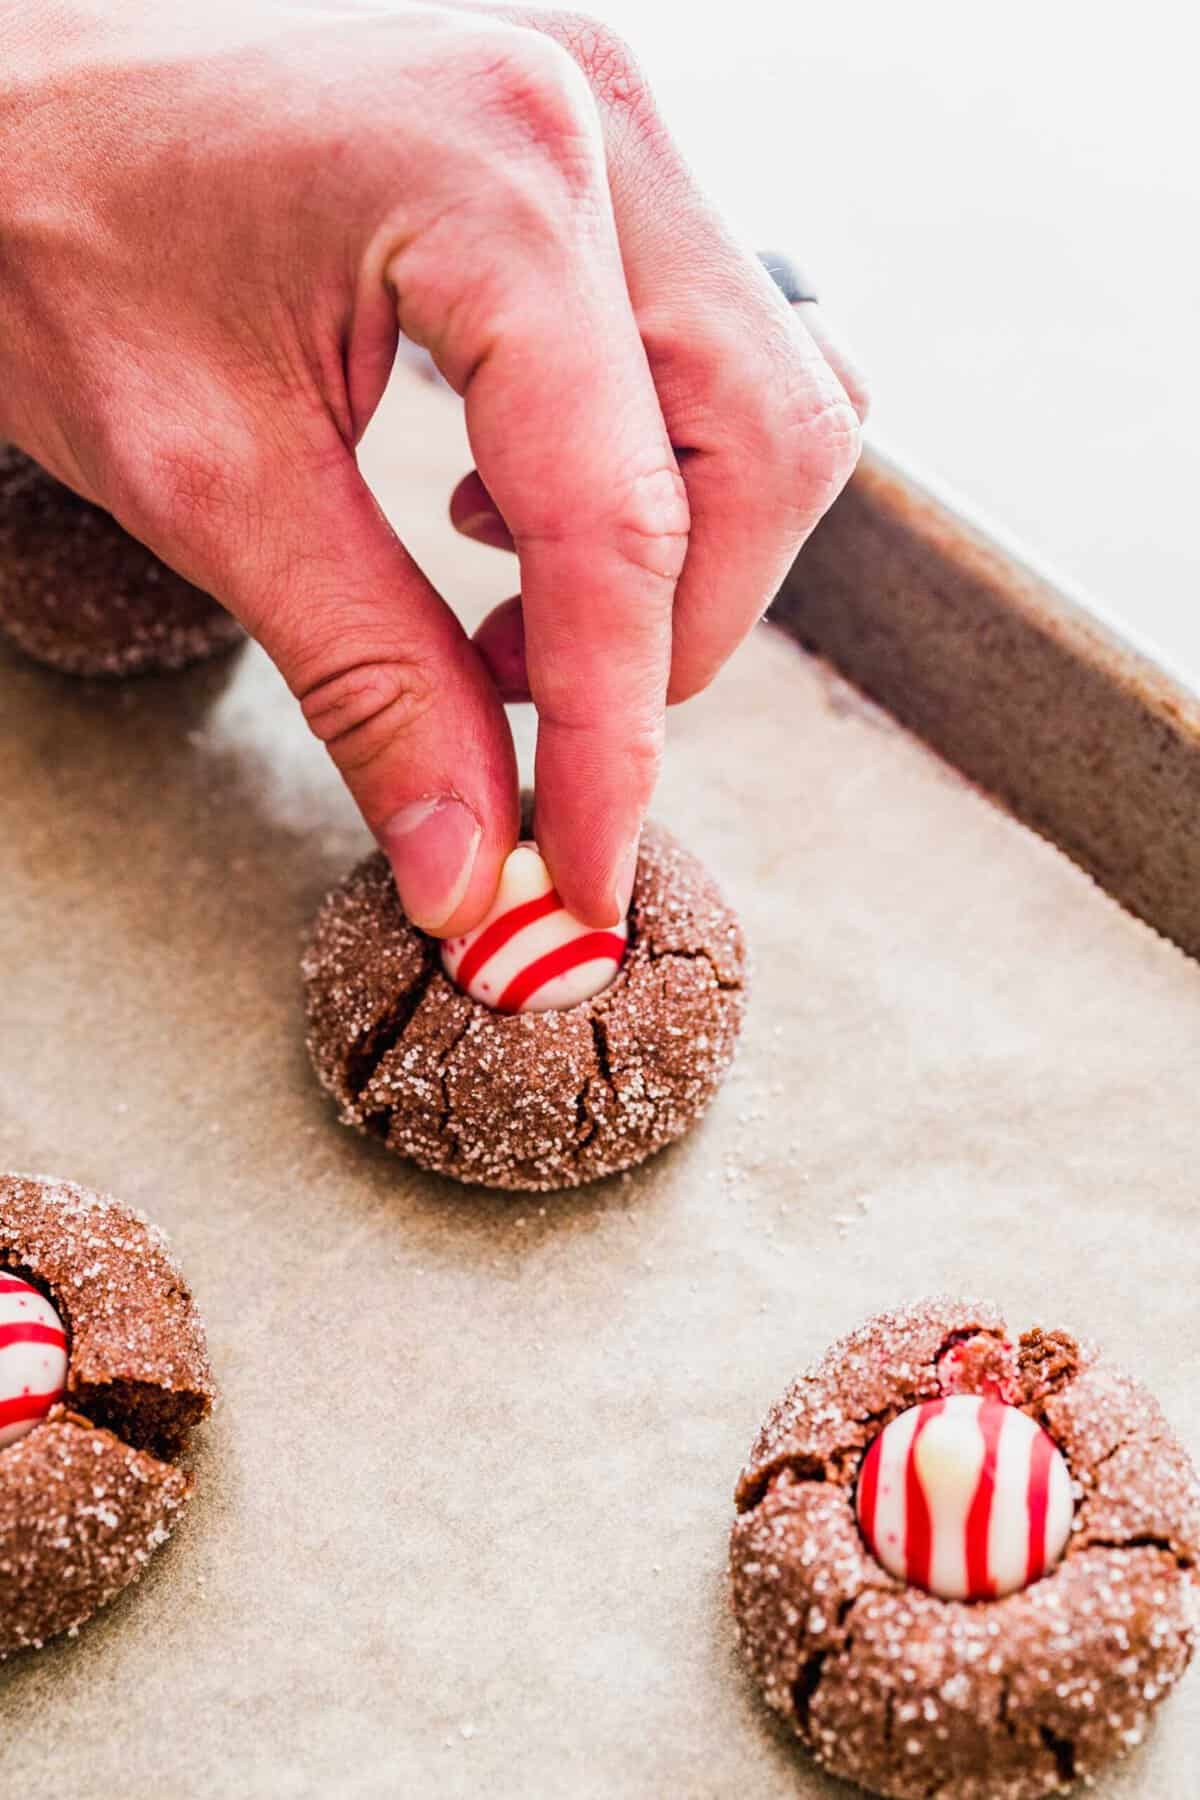 A hand pushing a Hershey's peppermint kiss into a baked chocolate peppermint kiss cookie